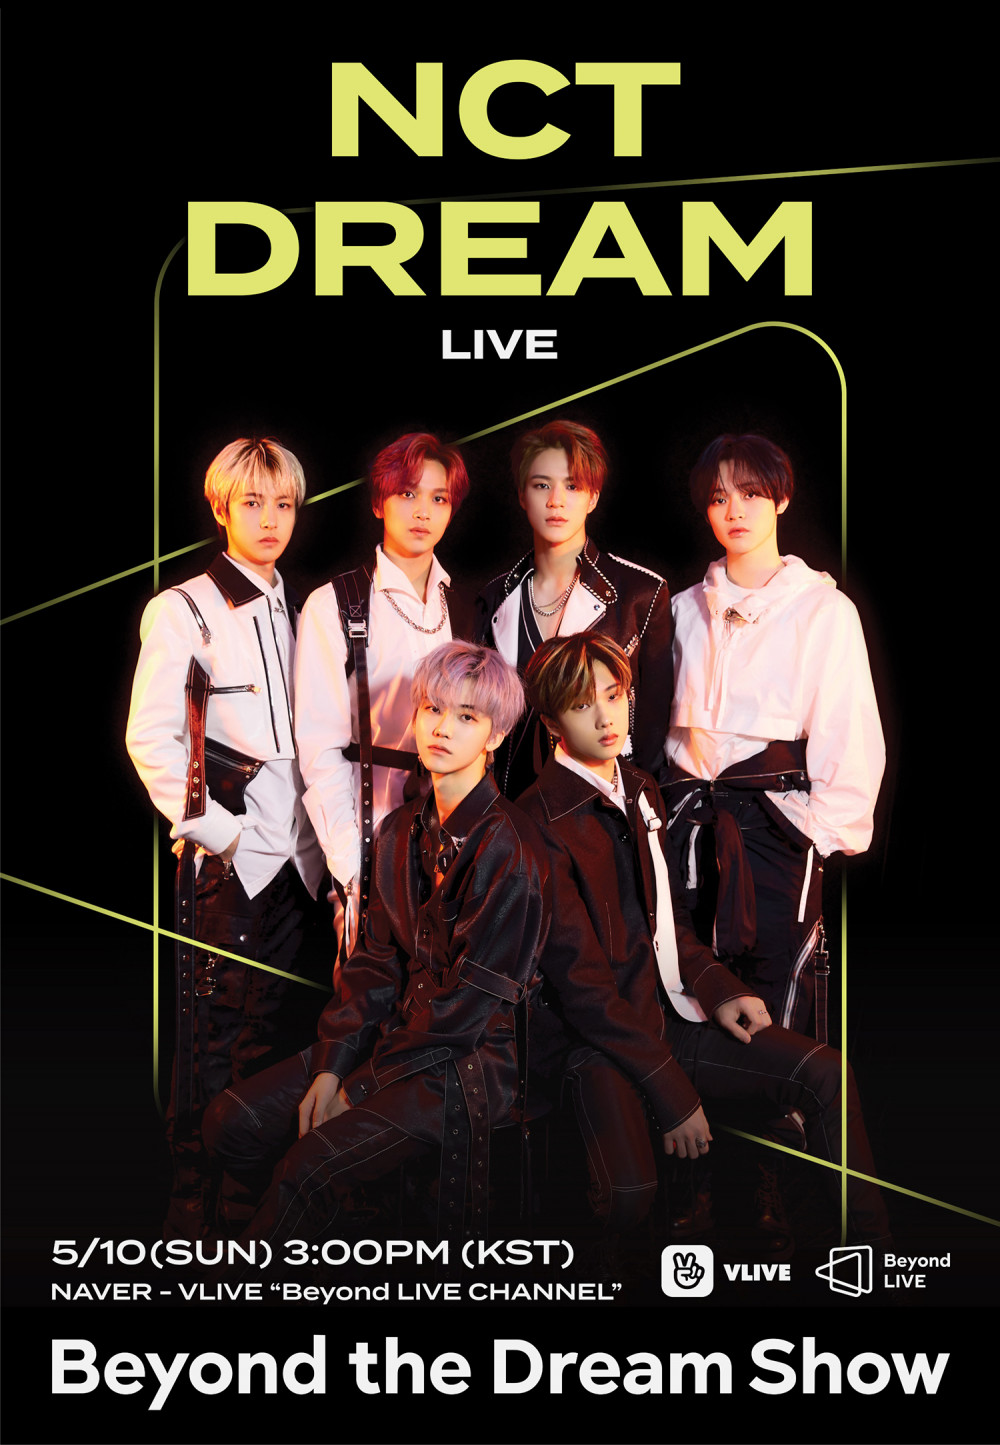 nct-dream-release-poster-as-the-third-artists-up-for-beyond-live-concert-series-1